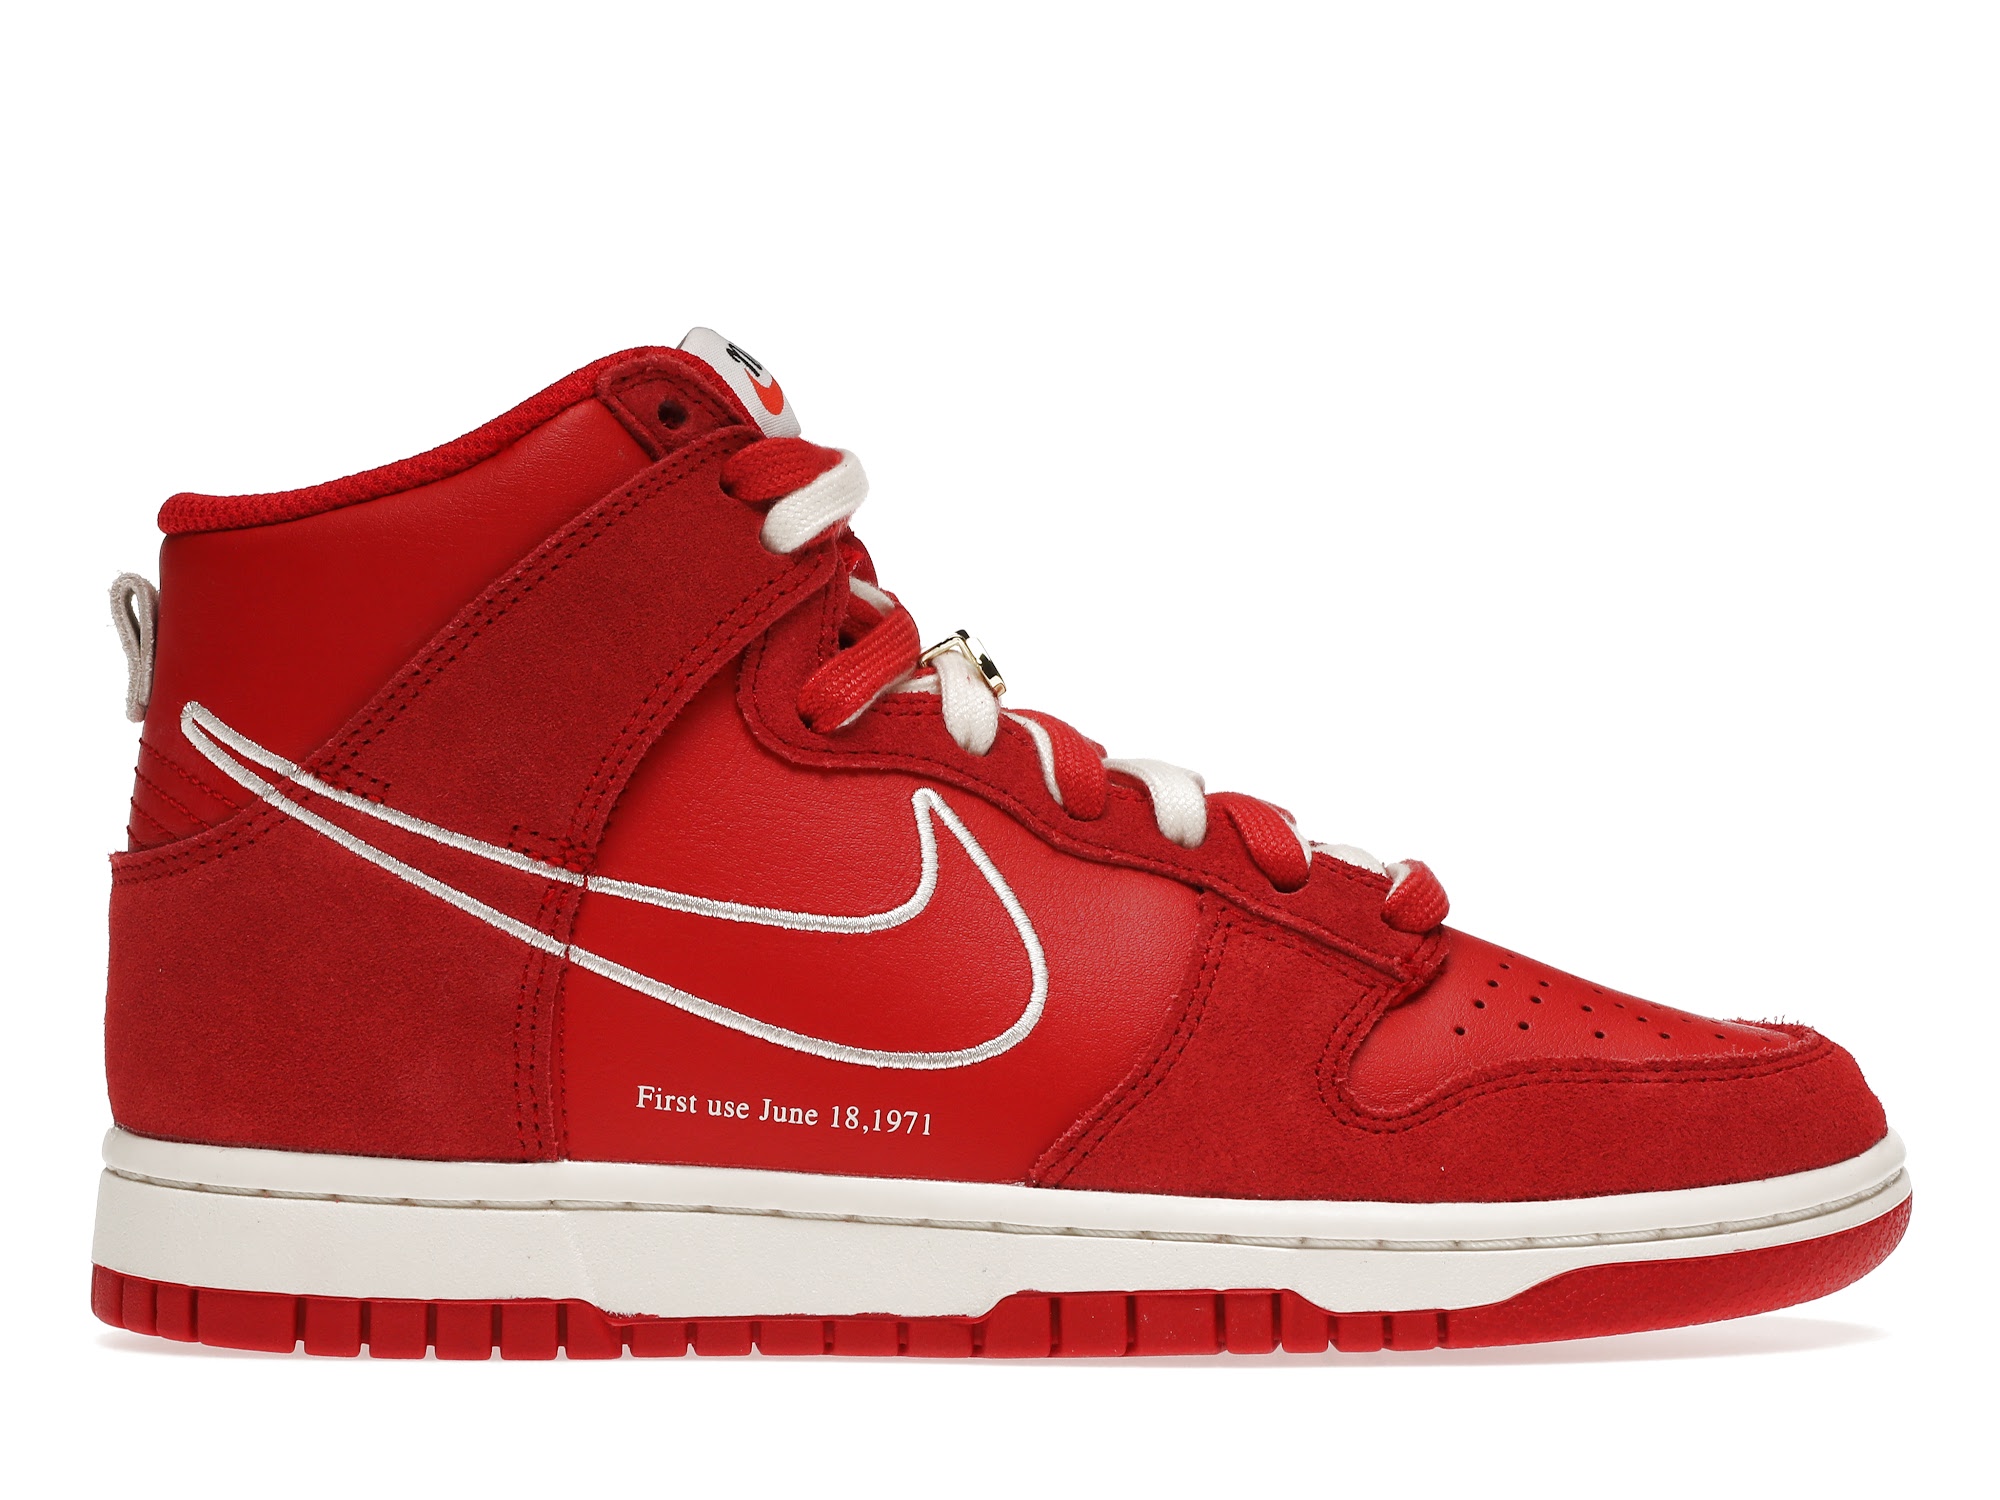 Nike Dunk High First Use Red Men's - DH0960-600 - US